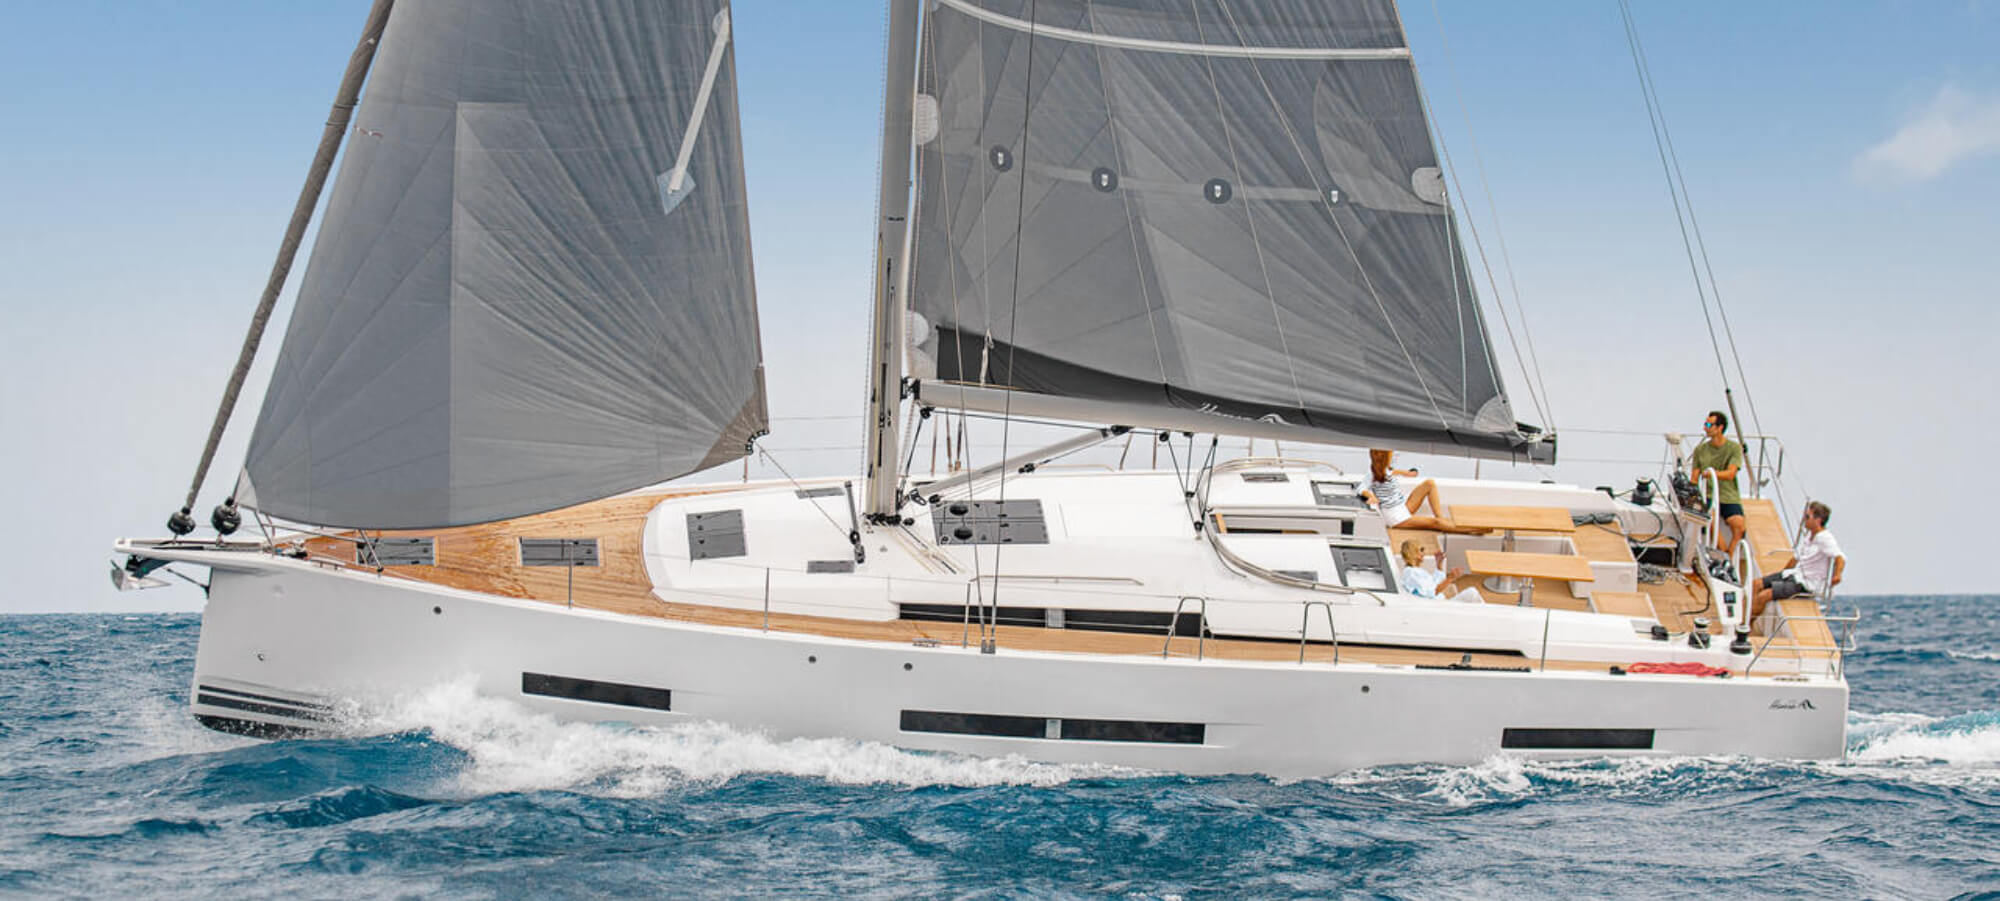 Bold, Brilliant, and Beautiful: Hanse 510 Reimagines the 51-foot Yacht